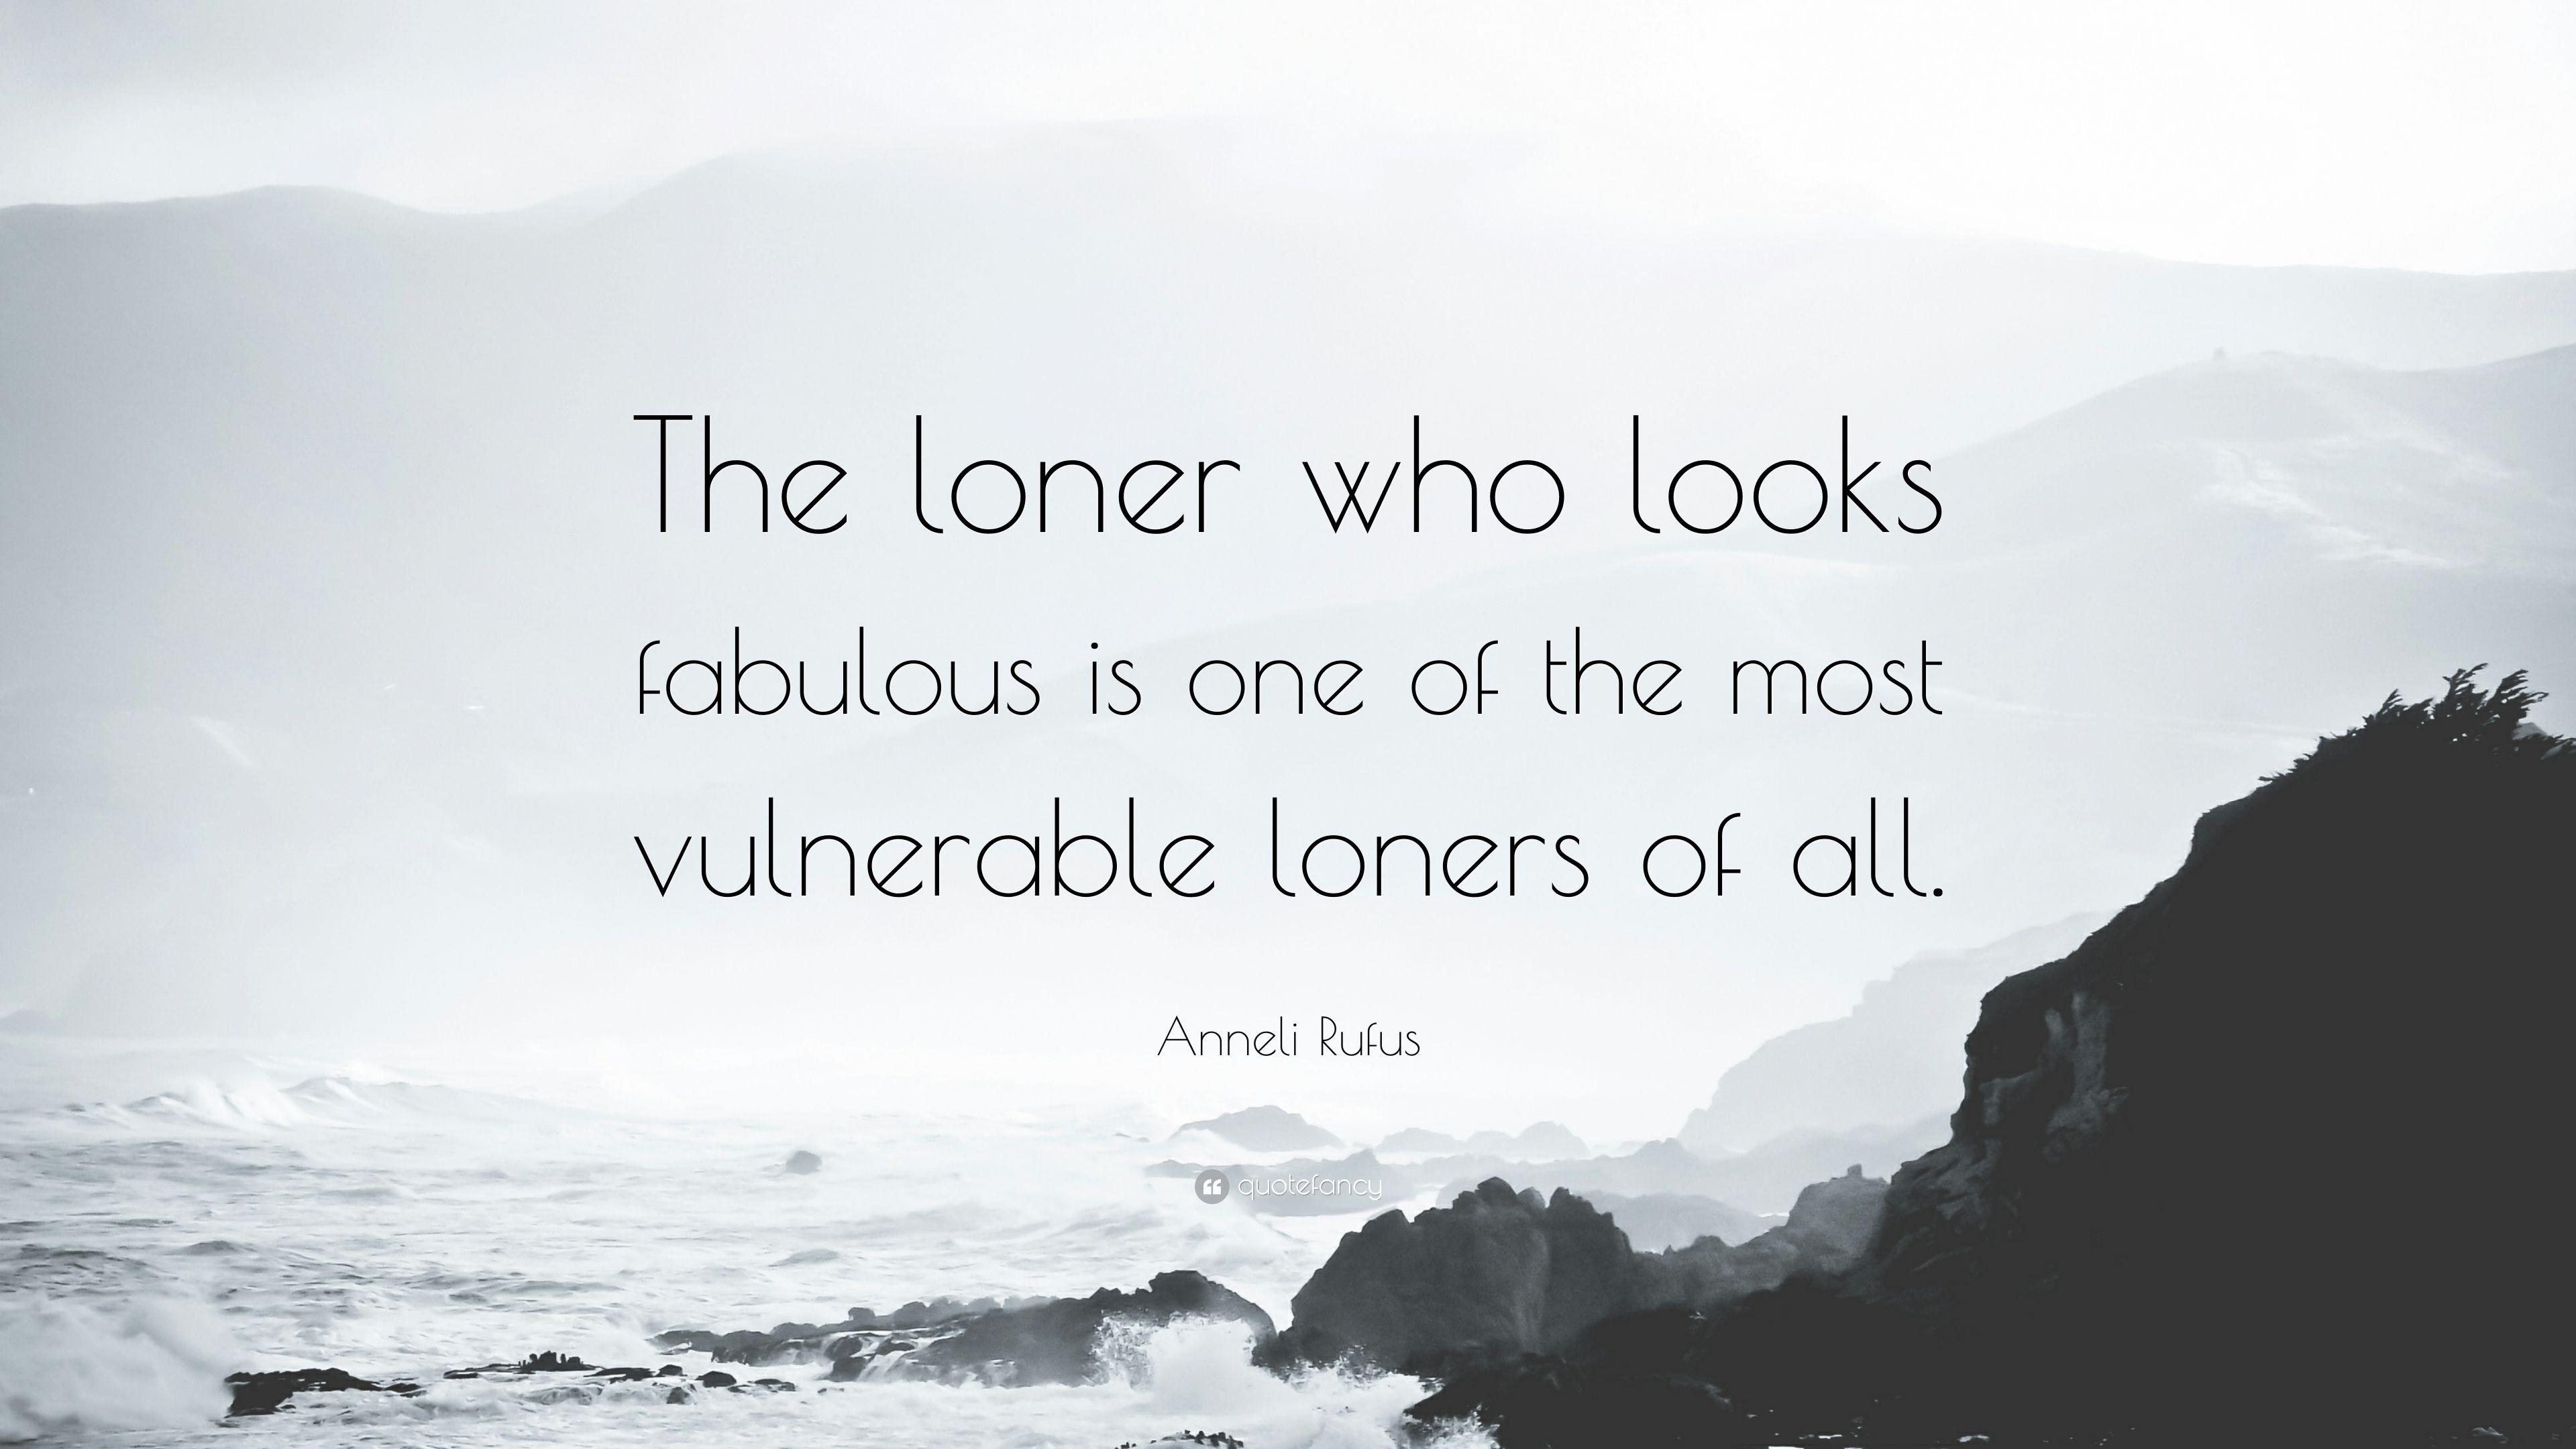 Anneli Rufus Quote: “The loner who looks fabulous is one of the most